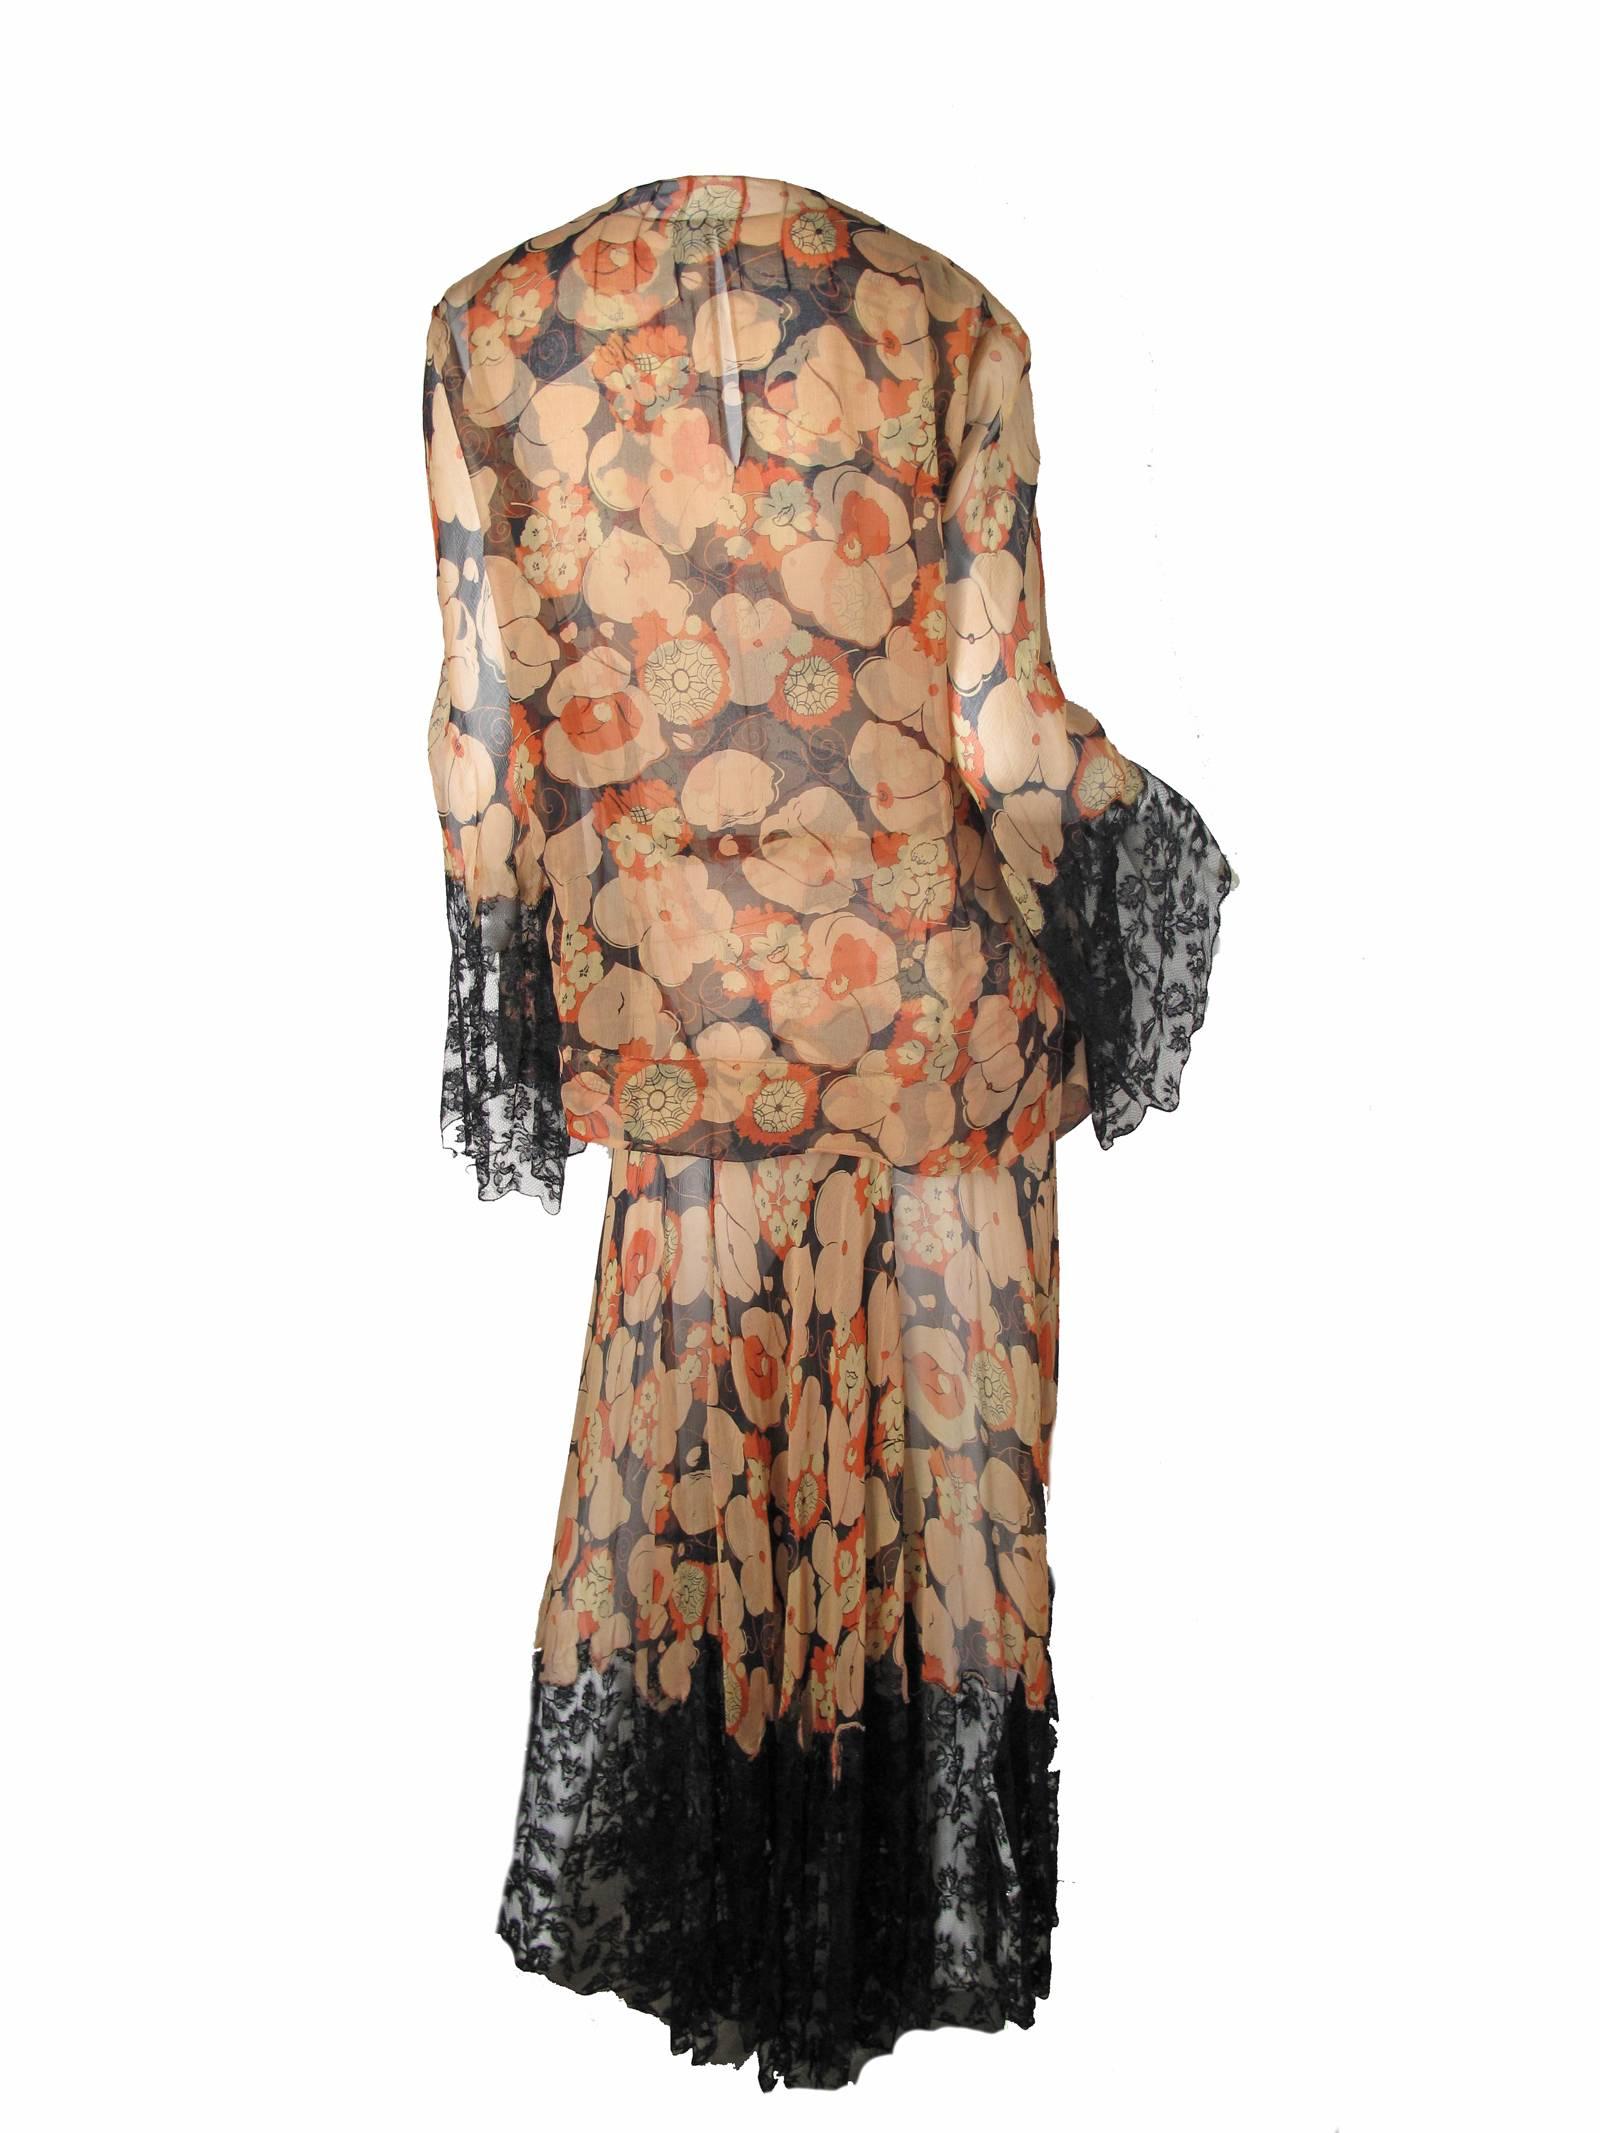 Women's Sheer Chiffon Floral Gown and Jacket with Lace, 1920s - 30s  